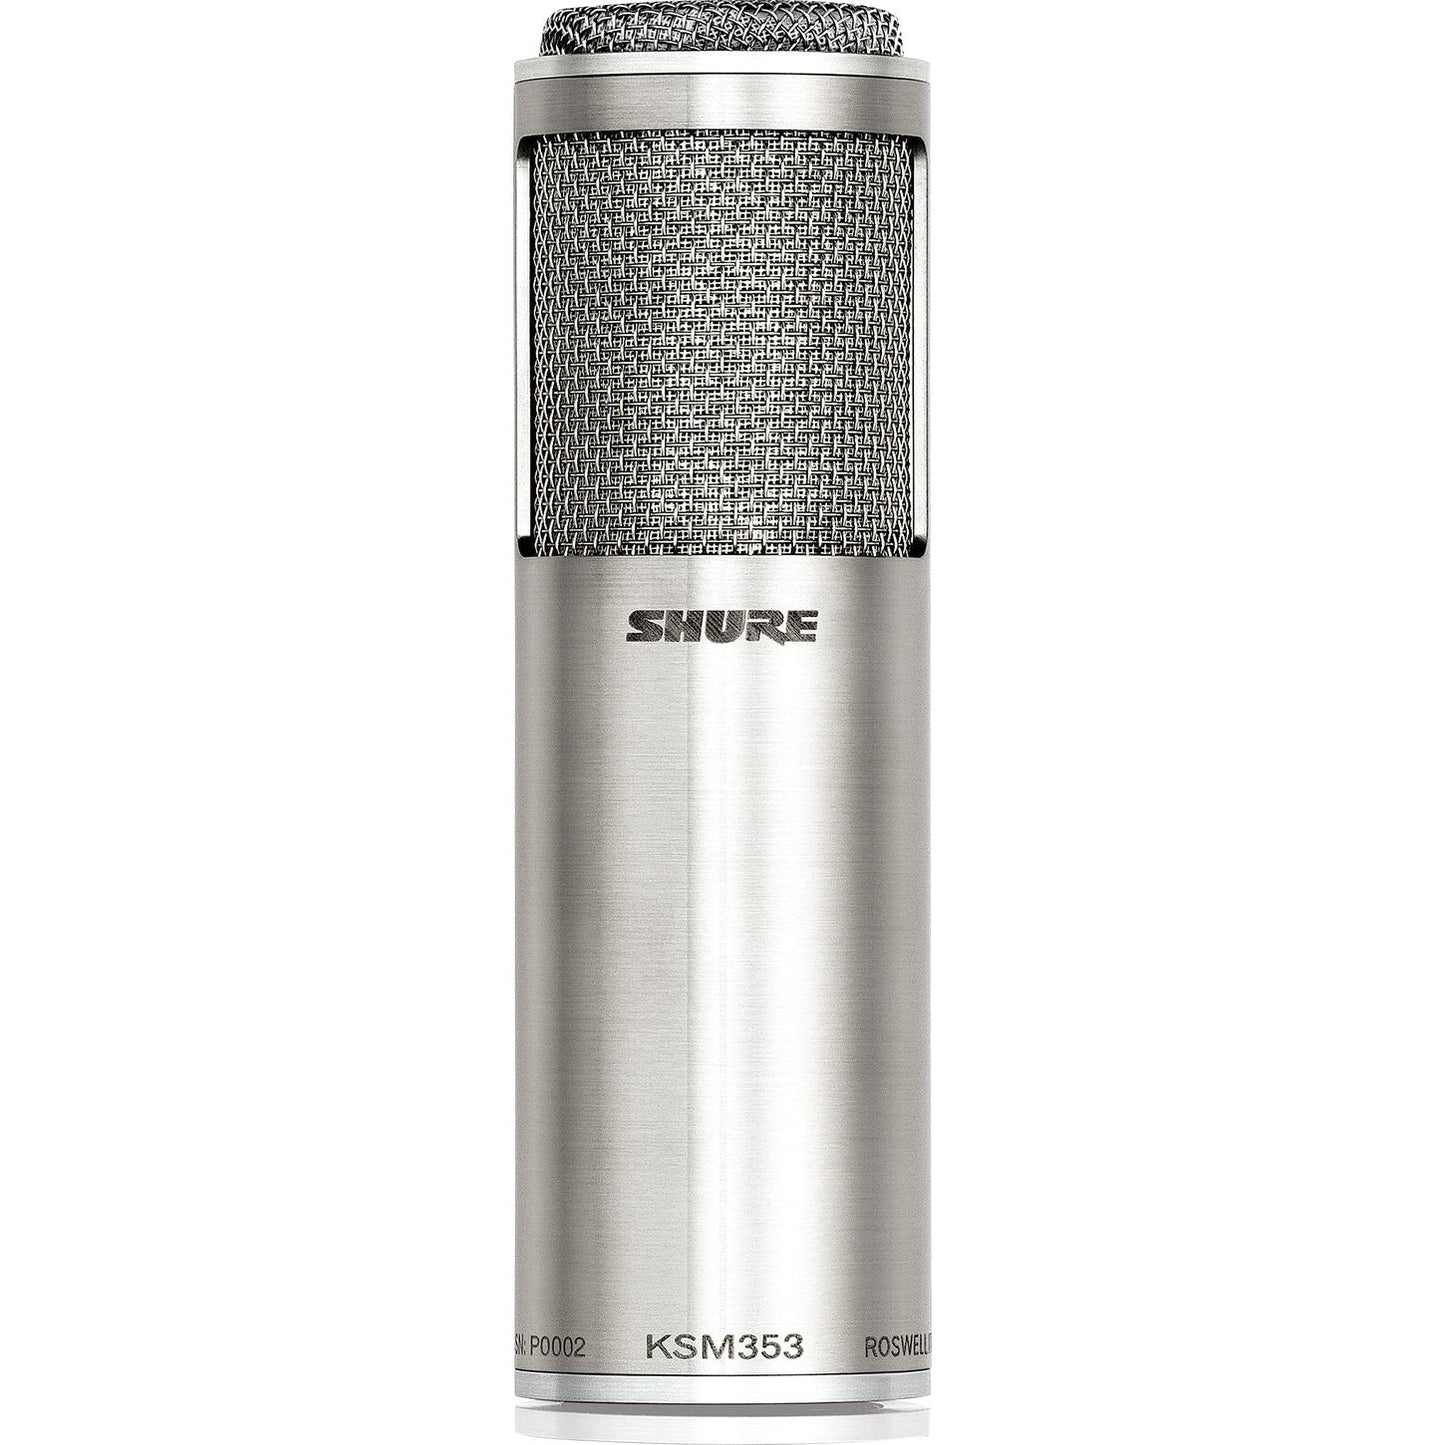 Shure KSM353 Bi-Directional & Dual Voice Ribbon Microphone with Roswell